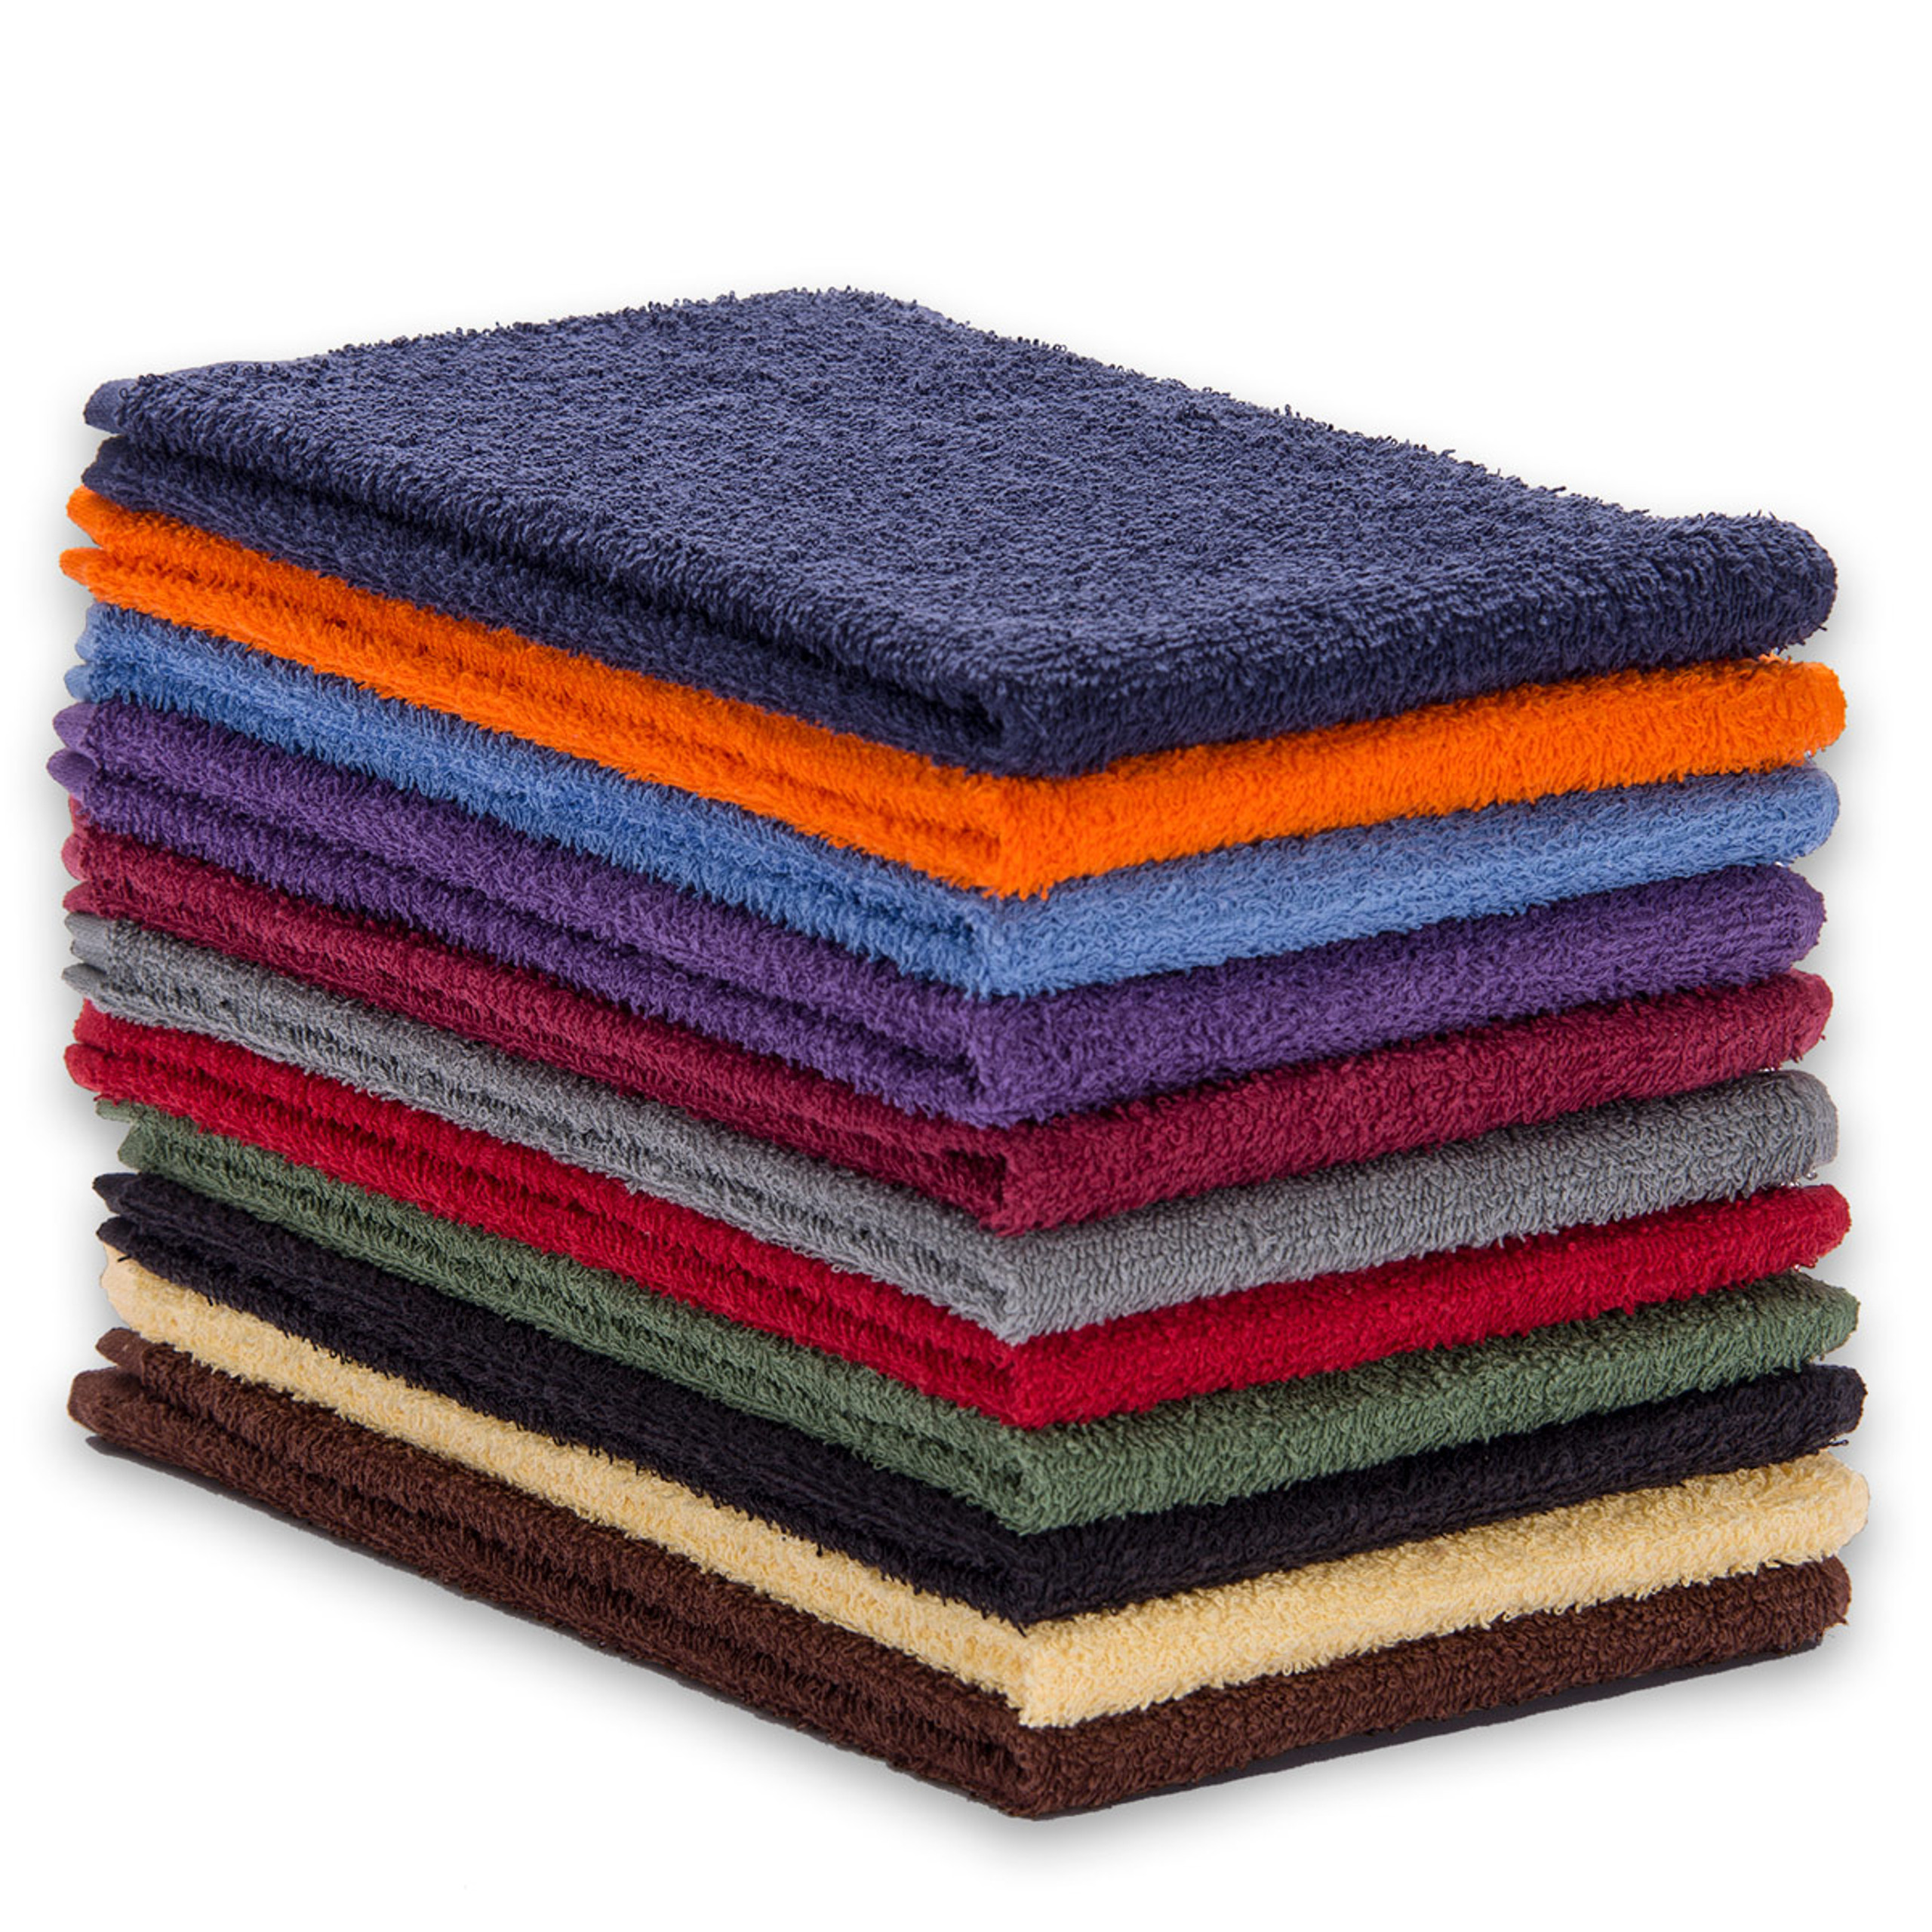 Wholesale Cotton Terry Towels 16x27 Medium Weight White